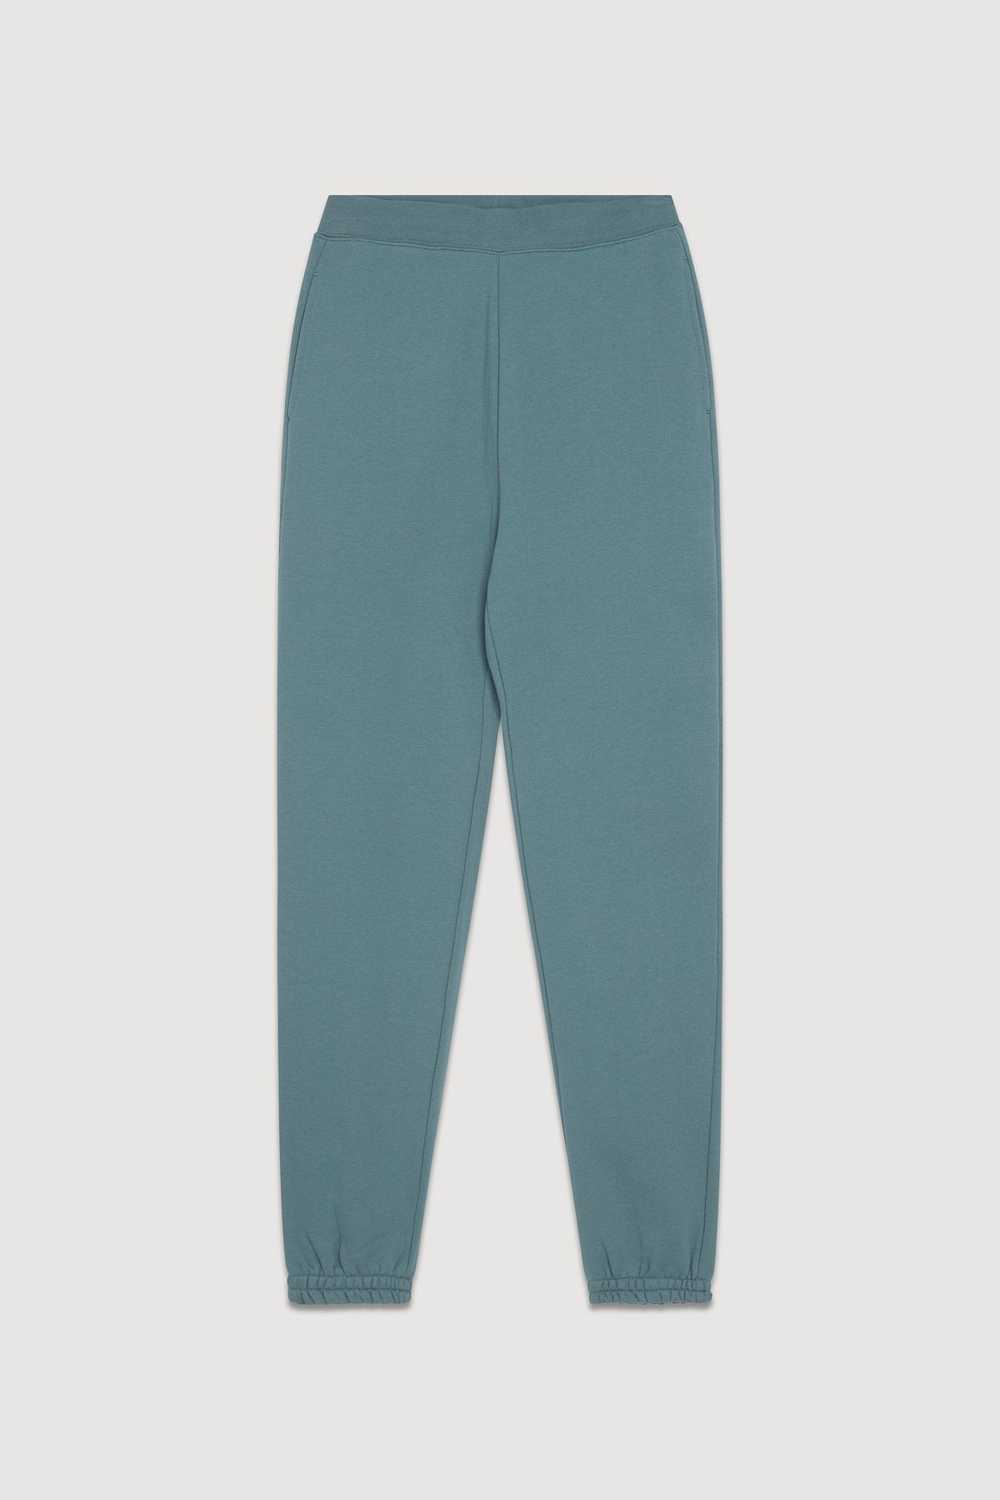 Girlfriend Collective Lagoon 50/50 Classic Jogger - image 2